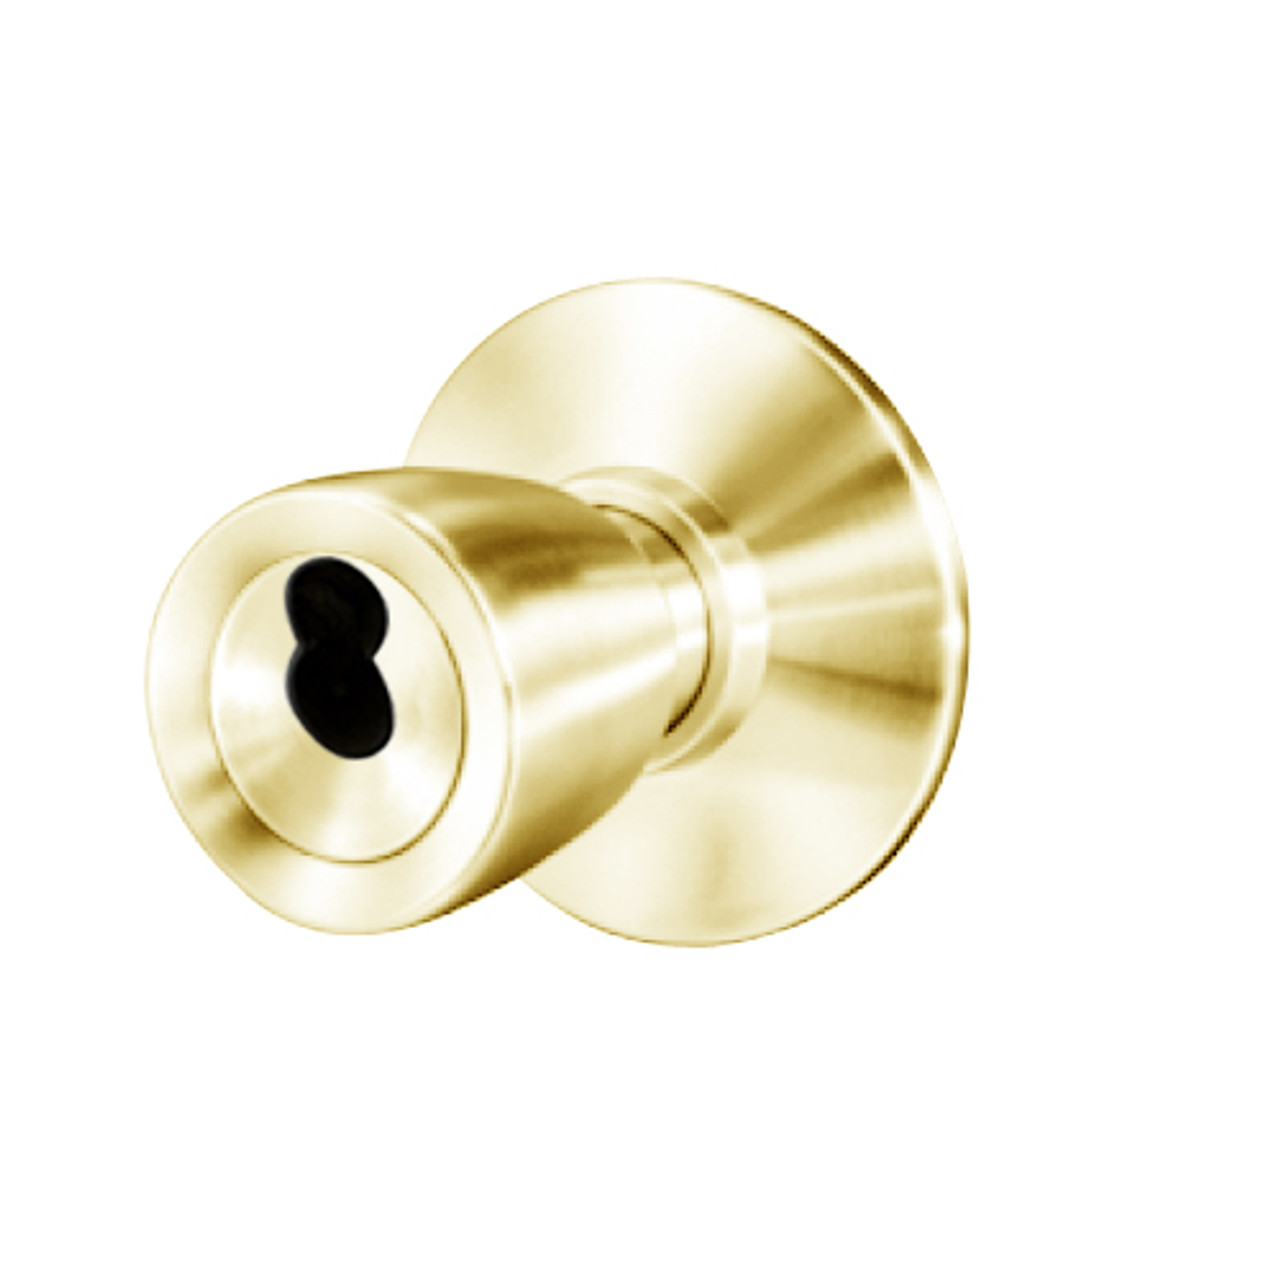 8K47YD6DS3605 Best 8K Series Exit Heavy Duty Cylindrical Knob Locks with Tulip Style in Bright Brass